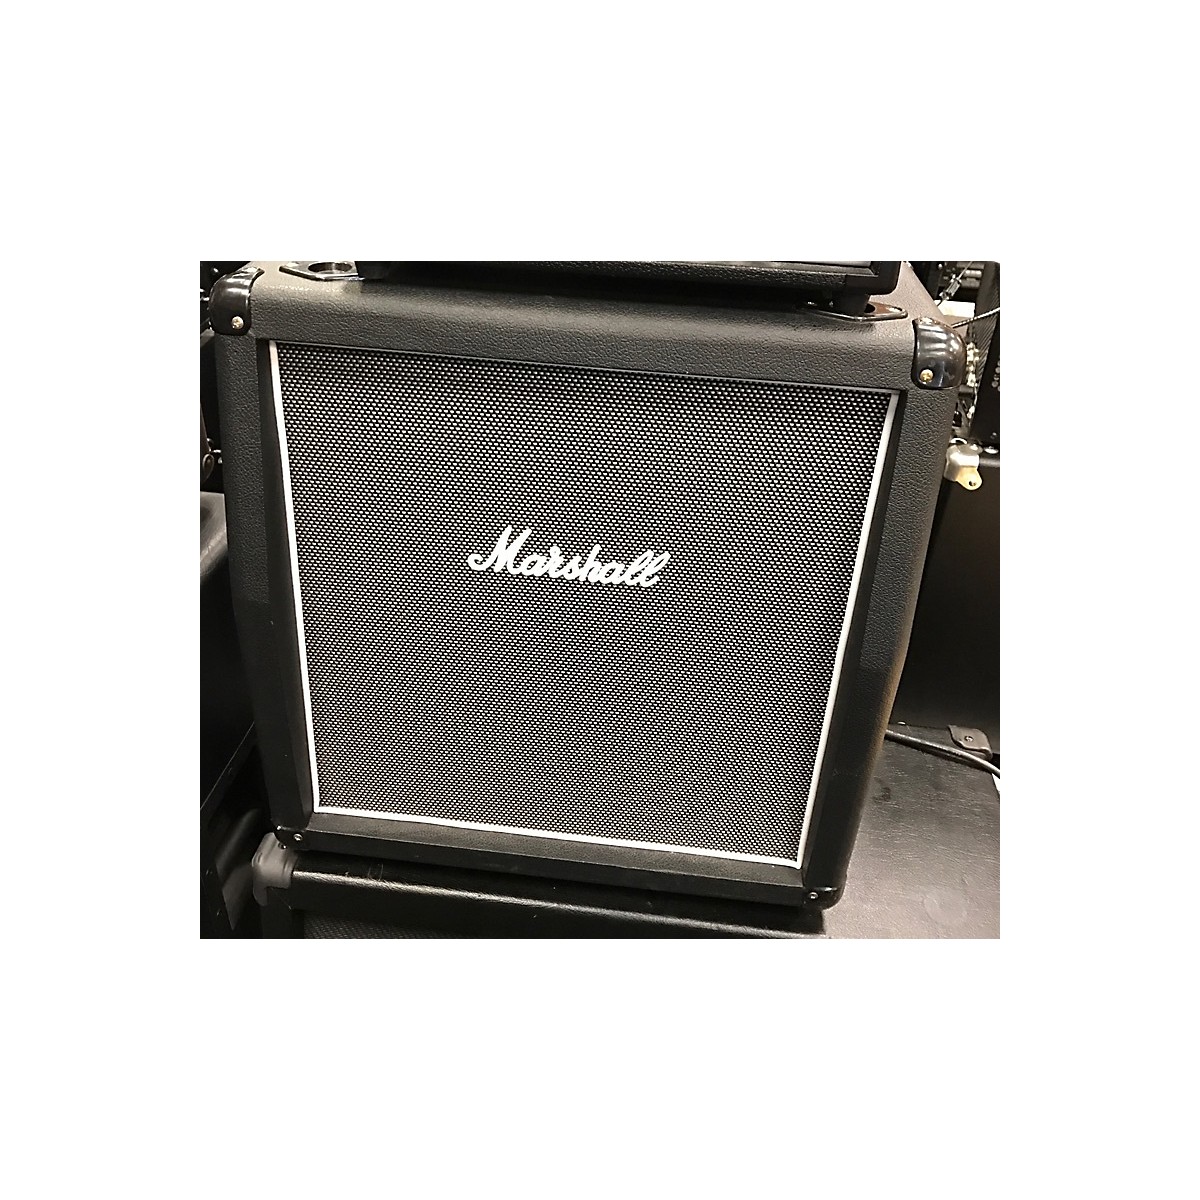 Used Marshall Mhz112a 1x12 Angled Guitar Cabinet Guitar Center